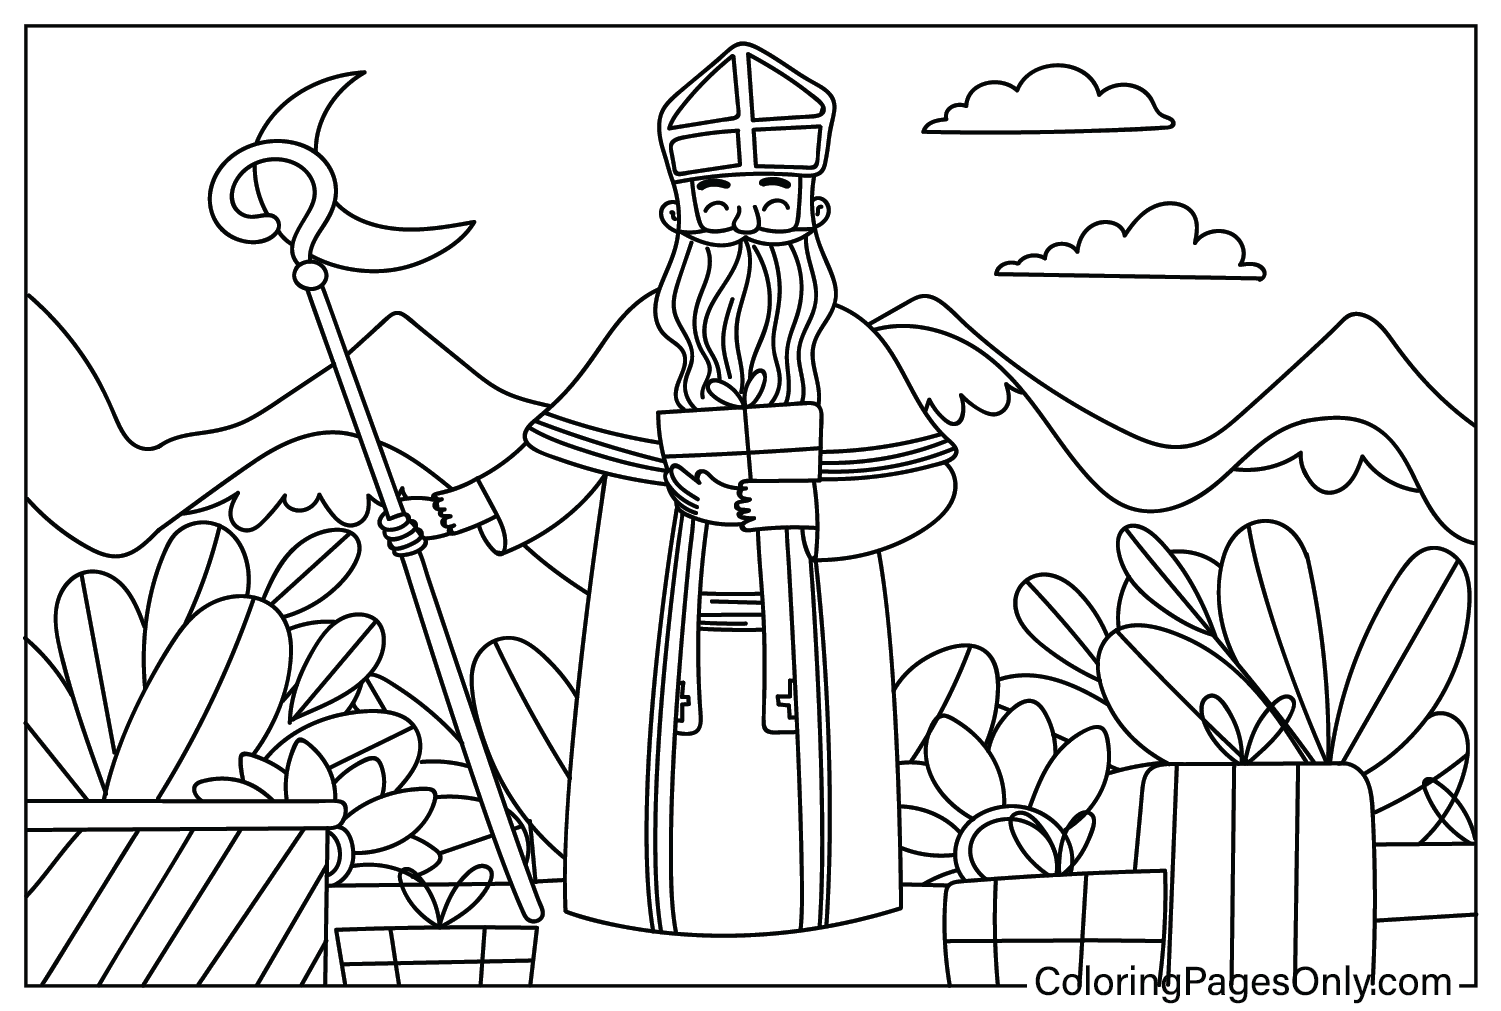 Saint Nicholas Day Coloring - Free Printable Coloring Pages